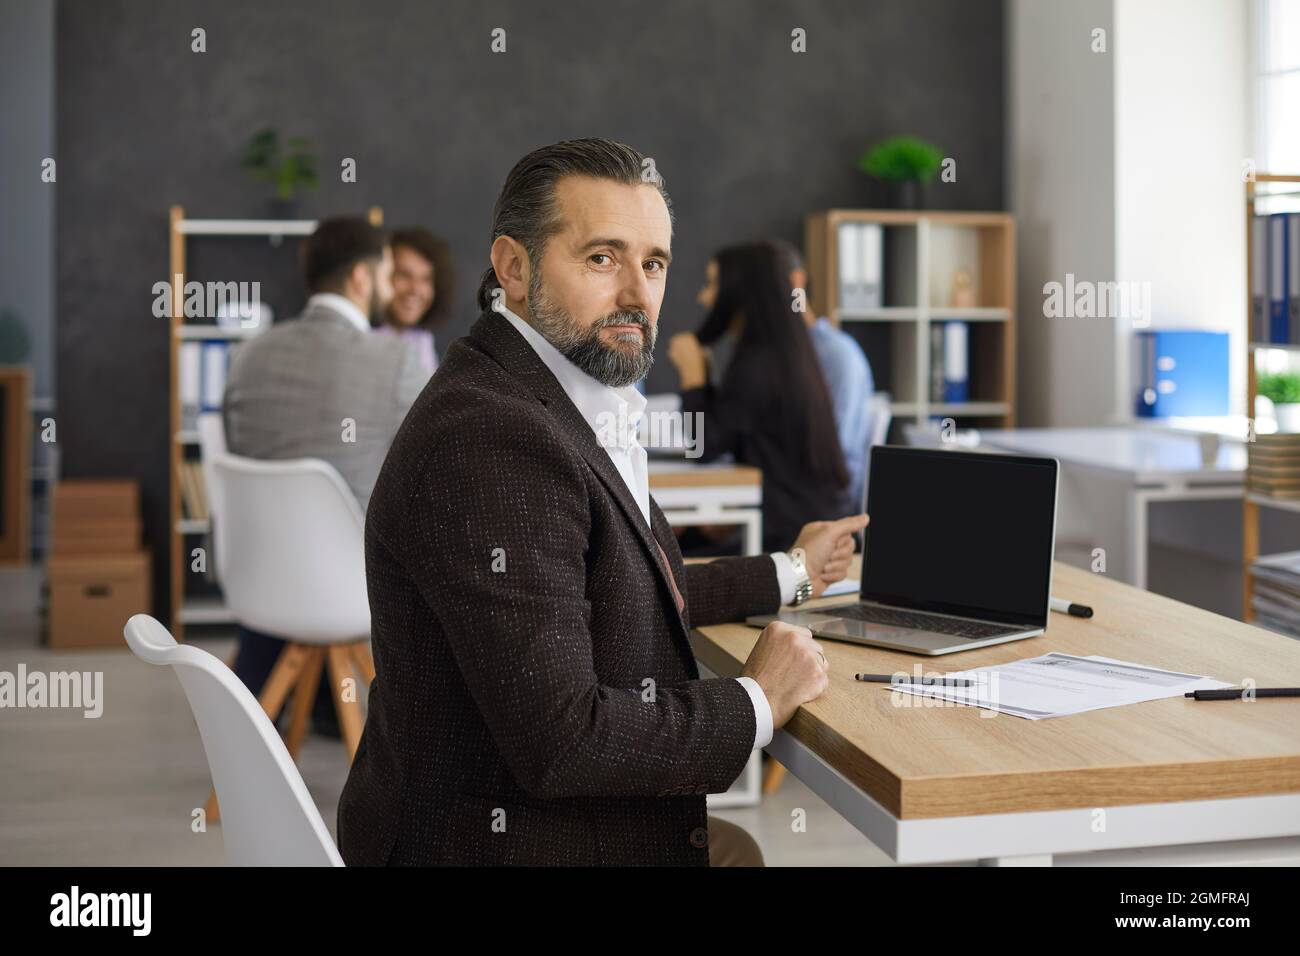 Portrait of senior business executive sitting at desk with laptop in modern office Stock Photo